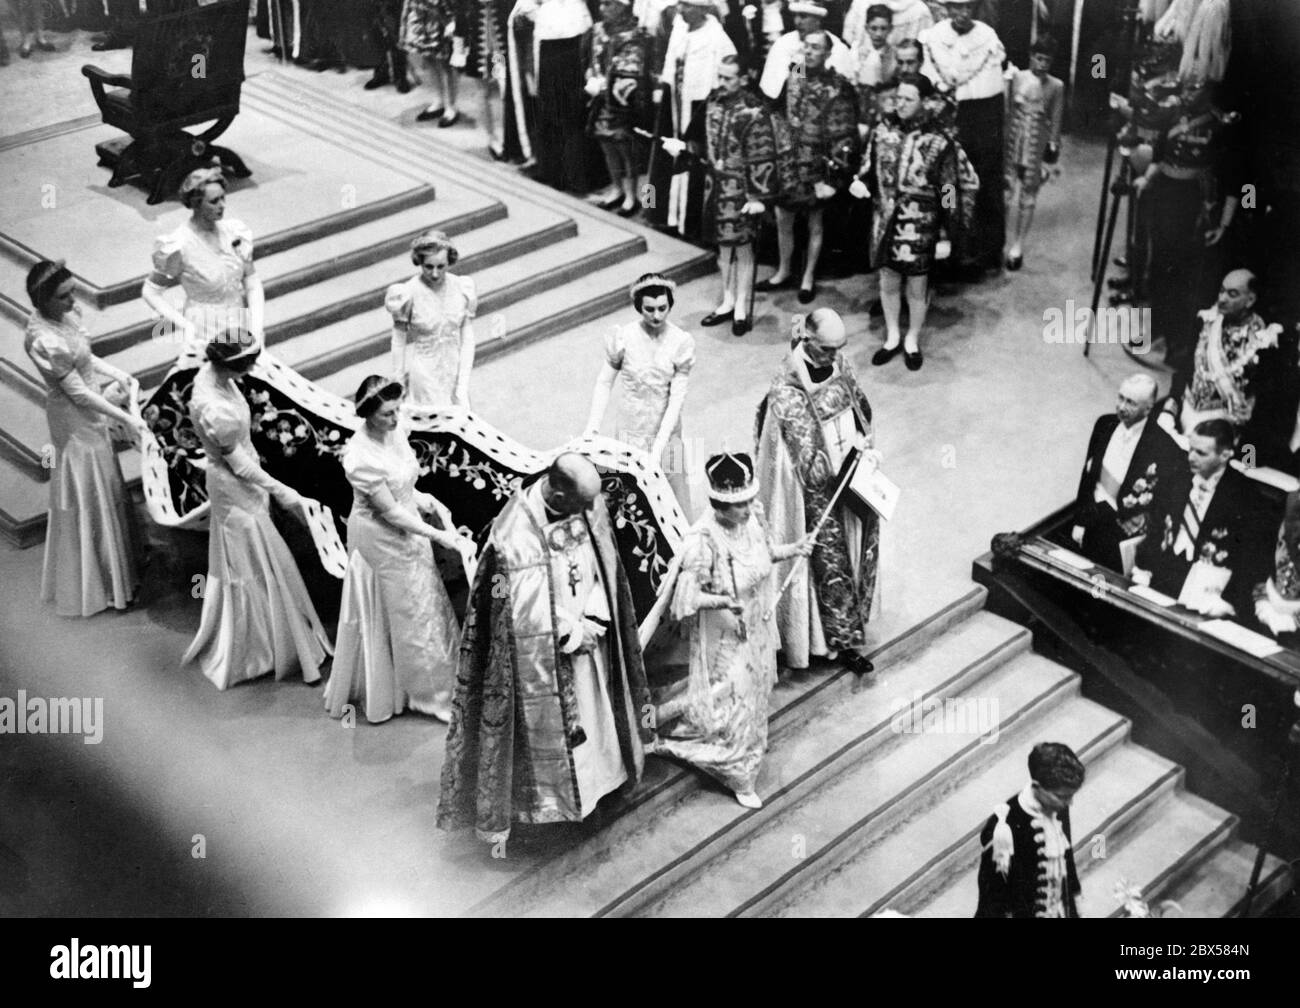 Queen Elizabeth leaves Westminster Abbey after her coronation with the sceptre in her hand. Her veil is carried by six women and she is accompanied by two priests. Stock Photo